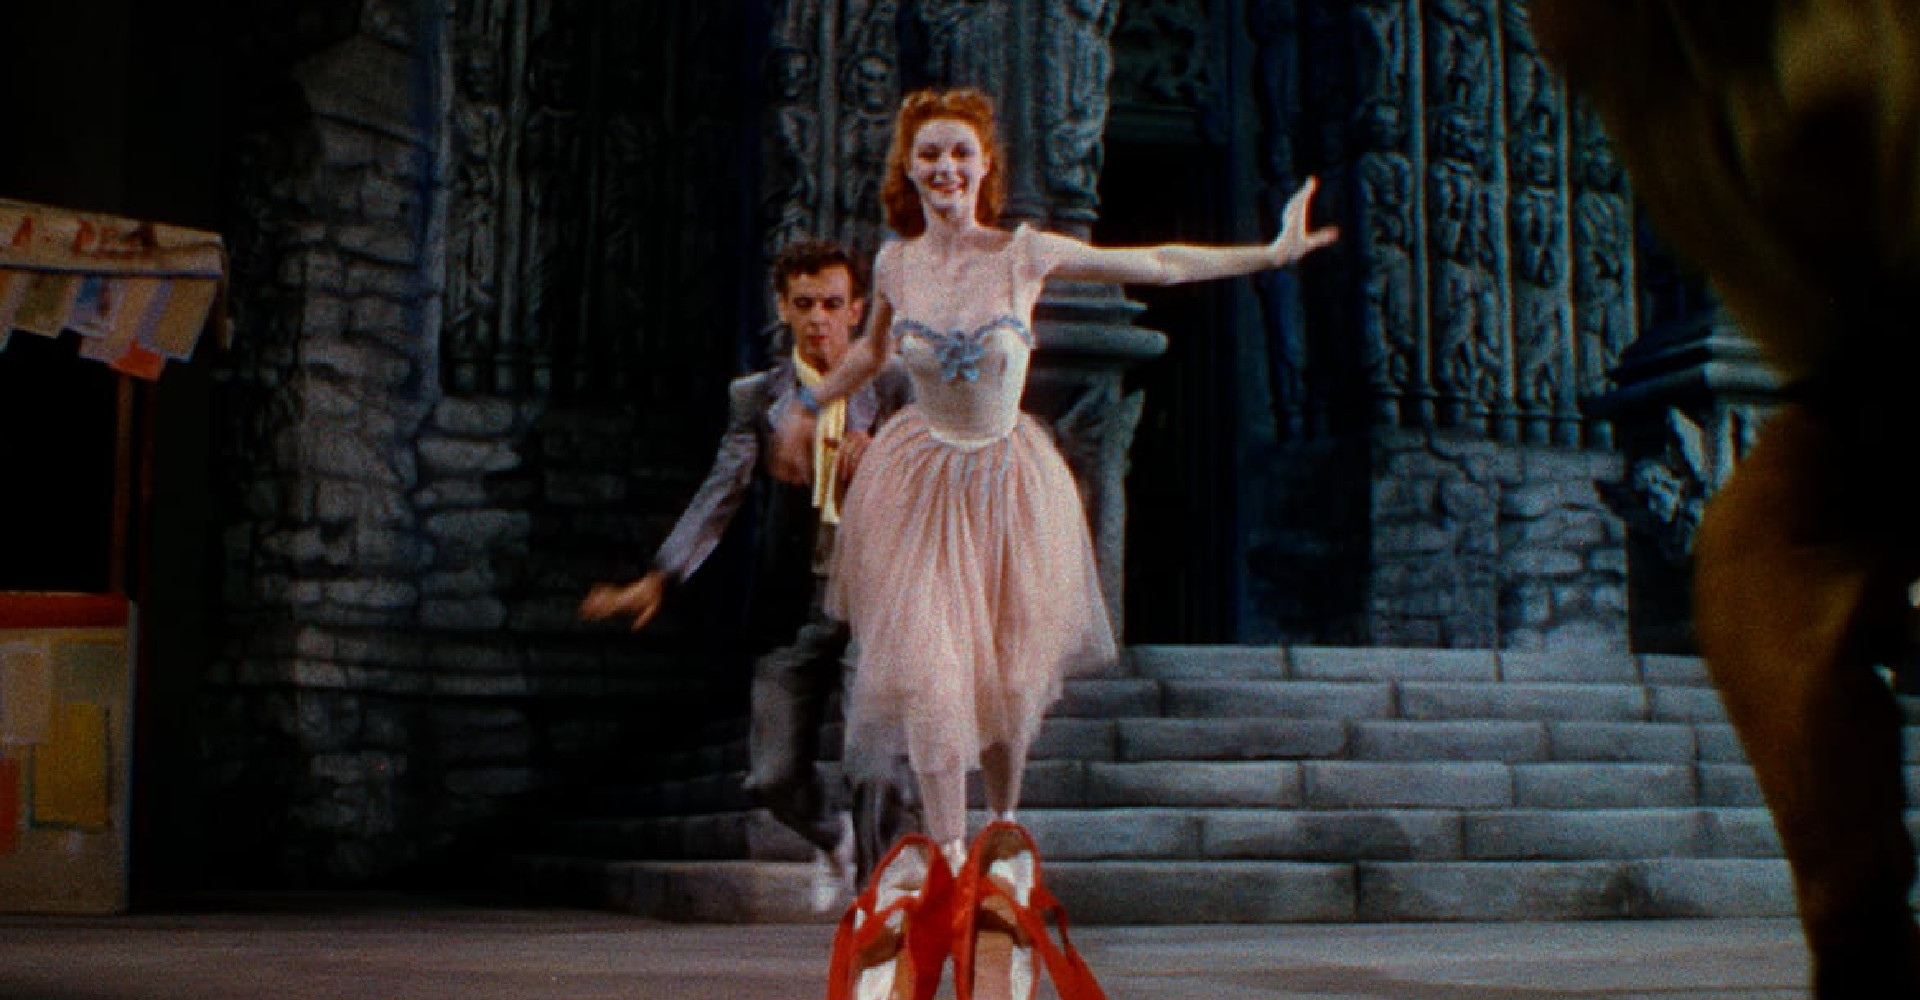 Woman ballerina with red shoes